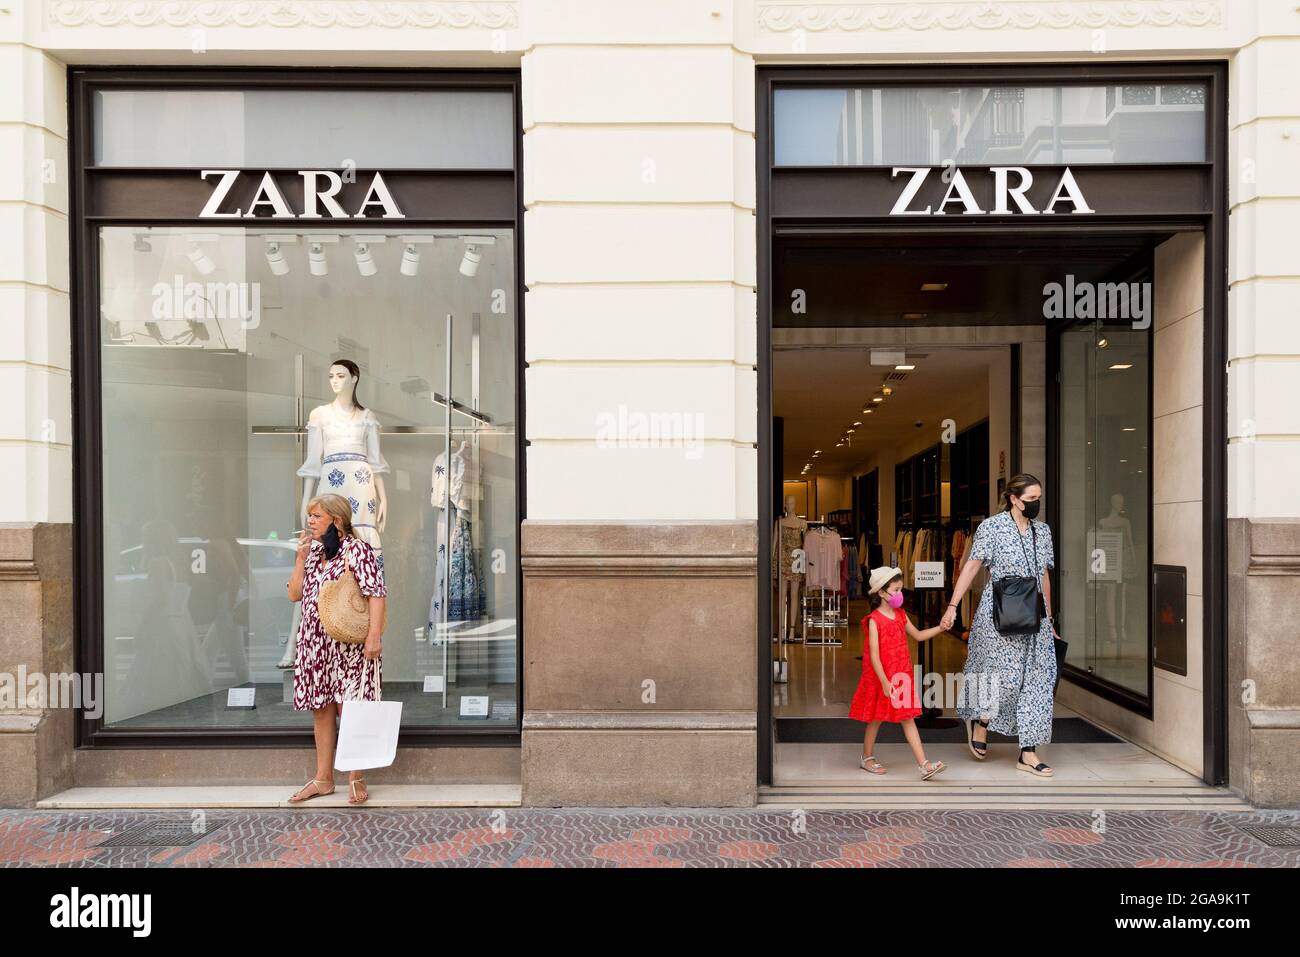 People seen at Zara clothing store in Valencia Stock Photo - Alamy